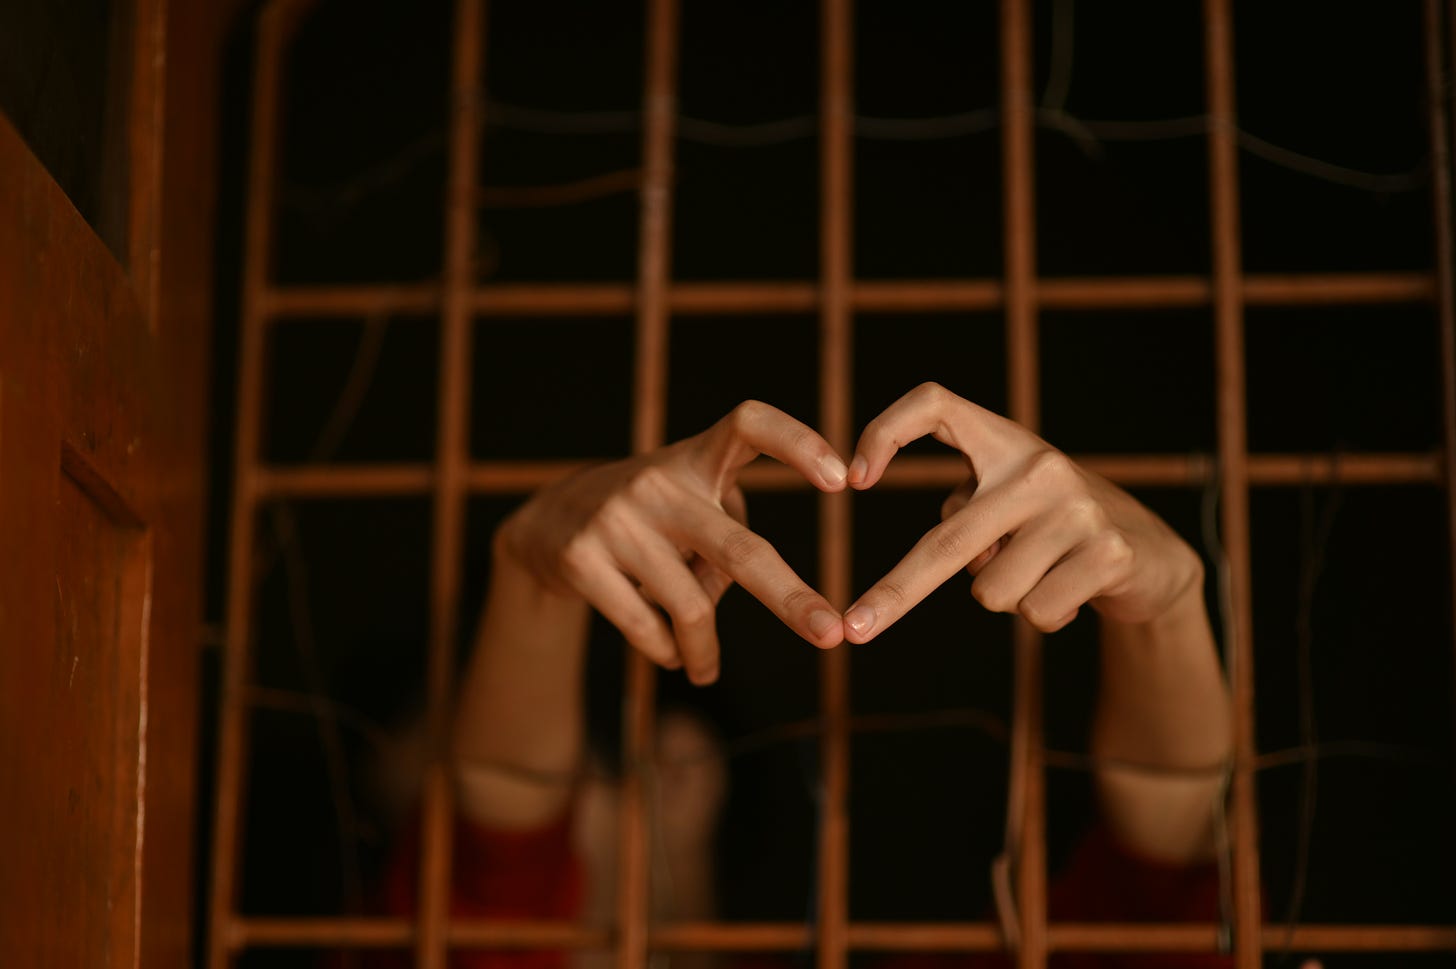 Hands extending from behind bars forming a heart